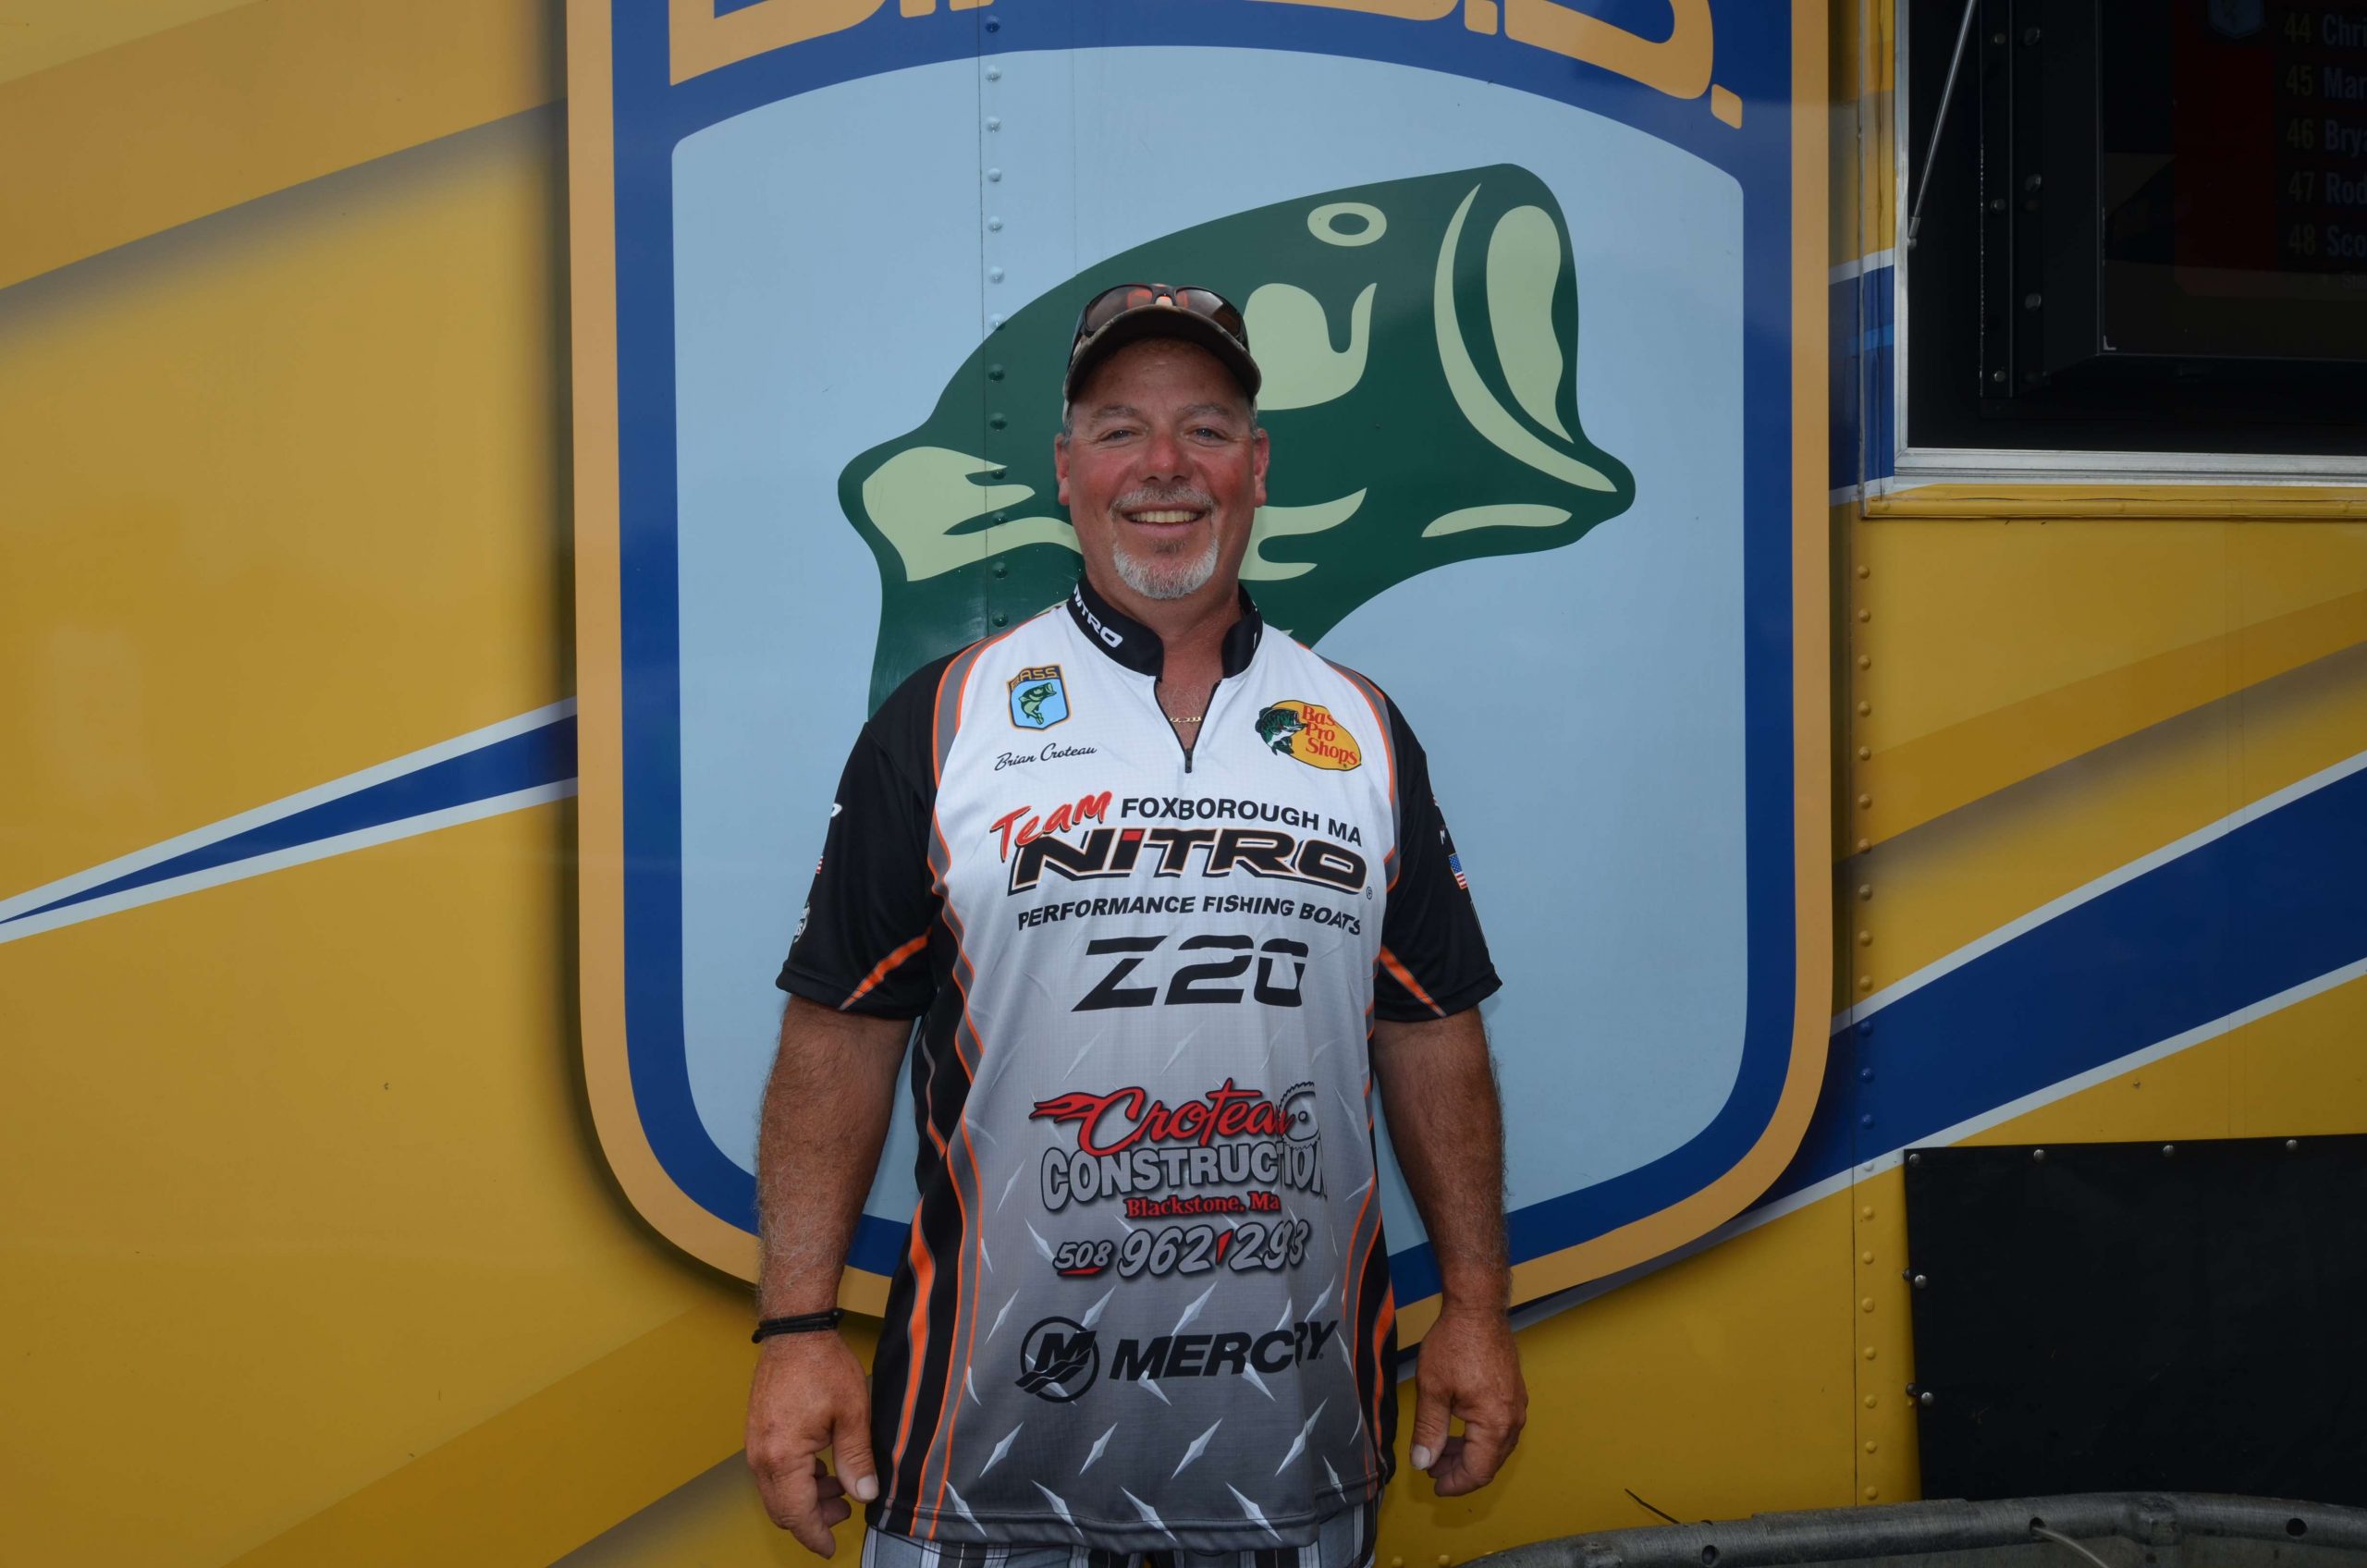 <h4>
Brian Croteau</h4>
Rhode Island Boater<br>
B.A.S.S. Nation Club: Northern R.I. Bass Anglers<BR>
Occupation:  Croteau Construction, owner<BR>
Hobbies: Spending time with family at beach, Riding my Harley<BR>
Sponsors: Tracker, Bass Pro Shops, Croteau Construction
